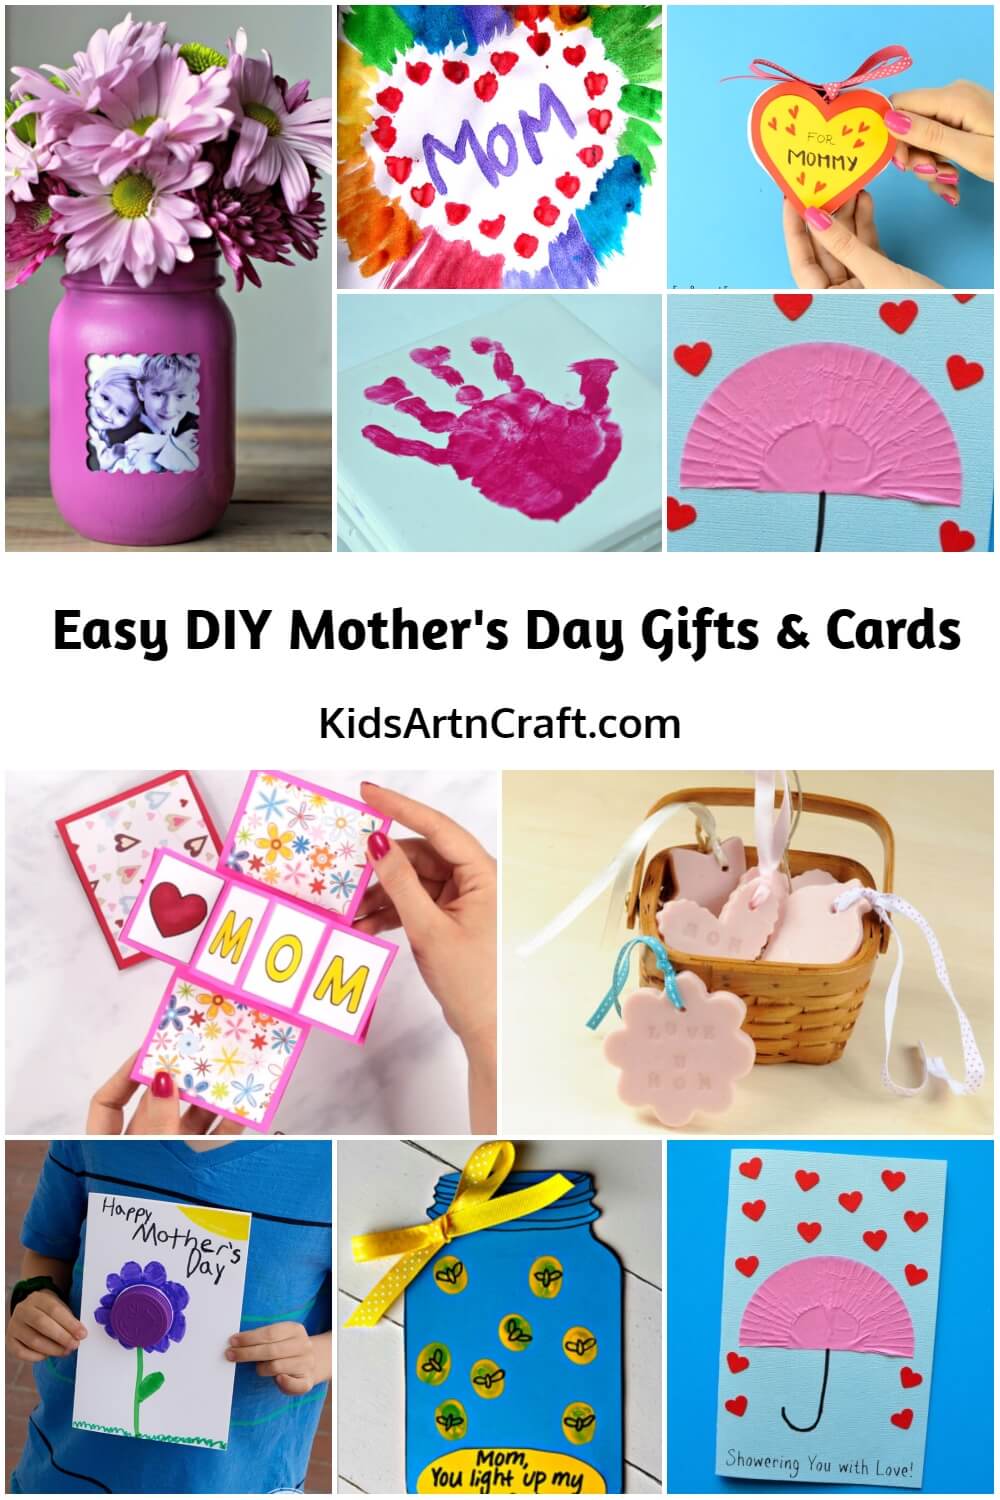 Easy DIY Mother's Day Gifts & Cards